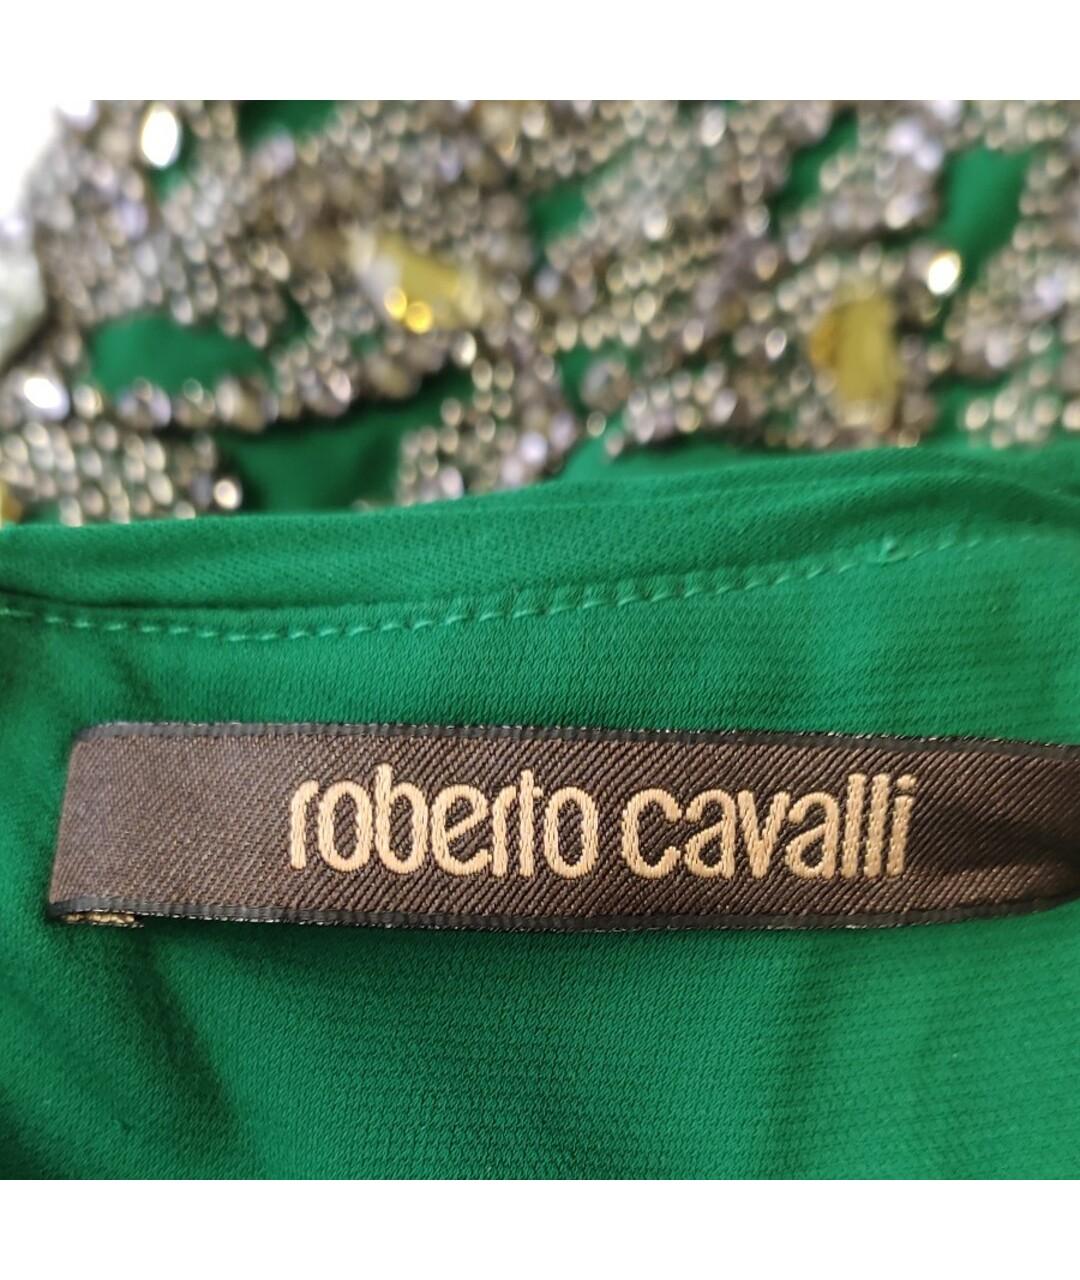 ROBERTO CAVALLI GREEN GOWN DRESS DECORATED with STONES  EU 38 1